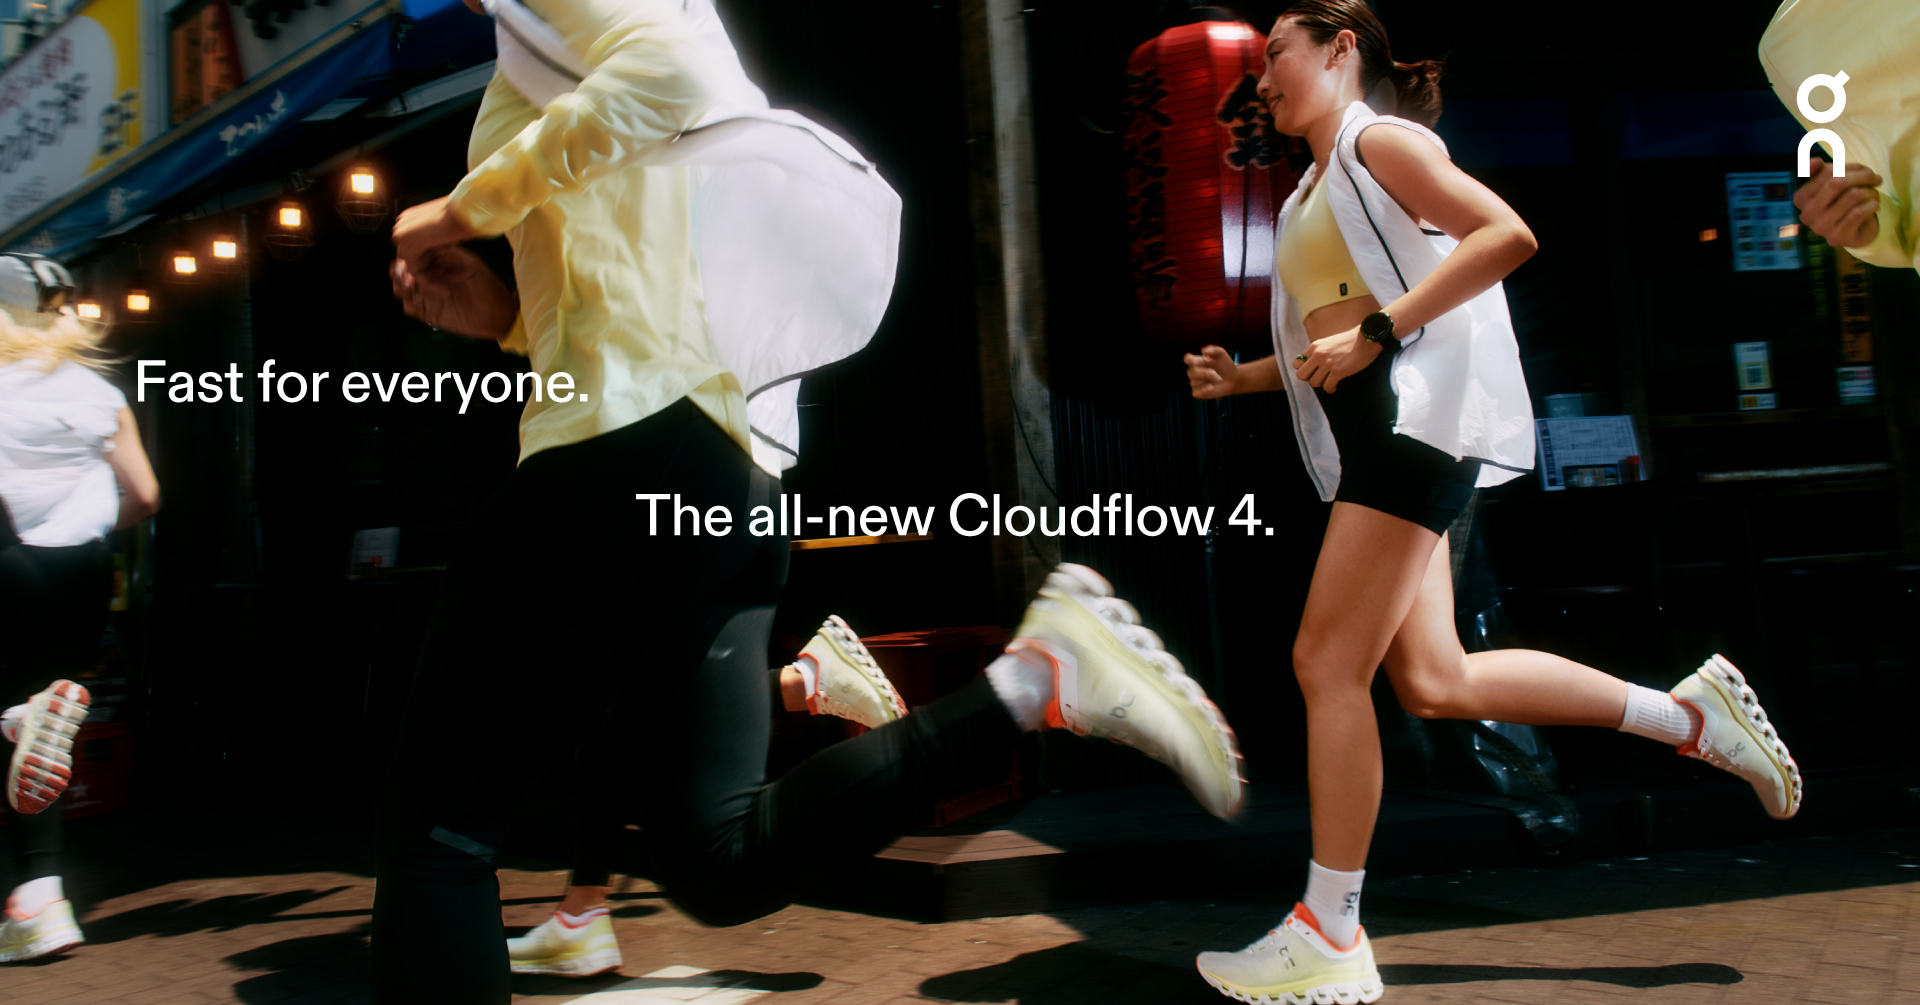 With Cloudflow 4 fast is now for everyone!, News